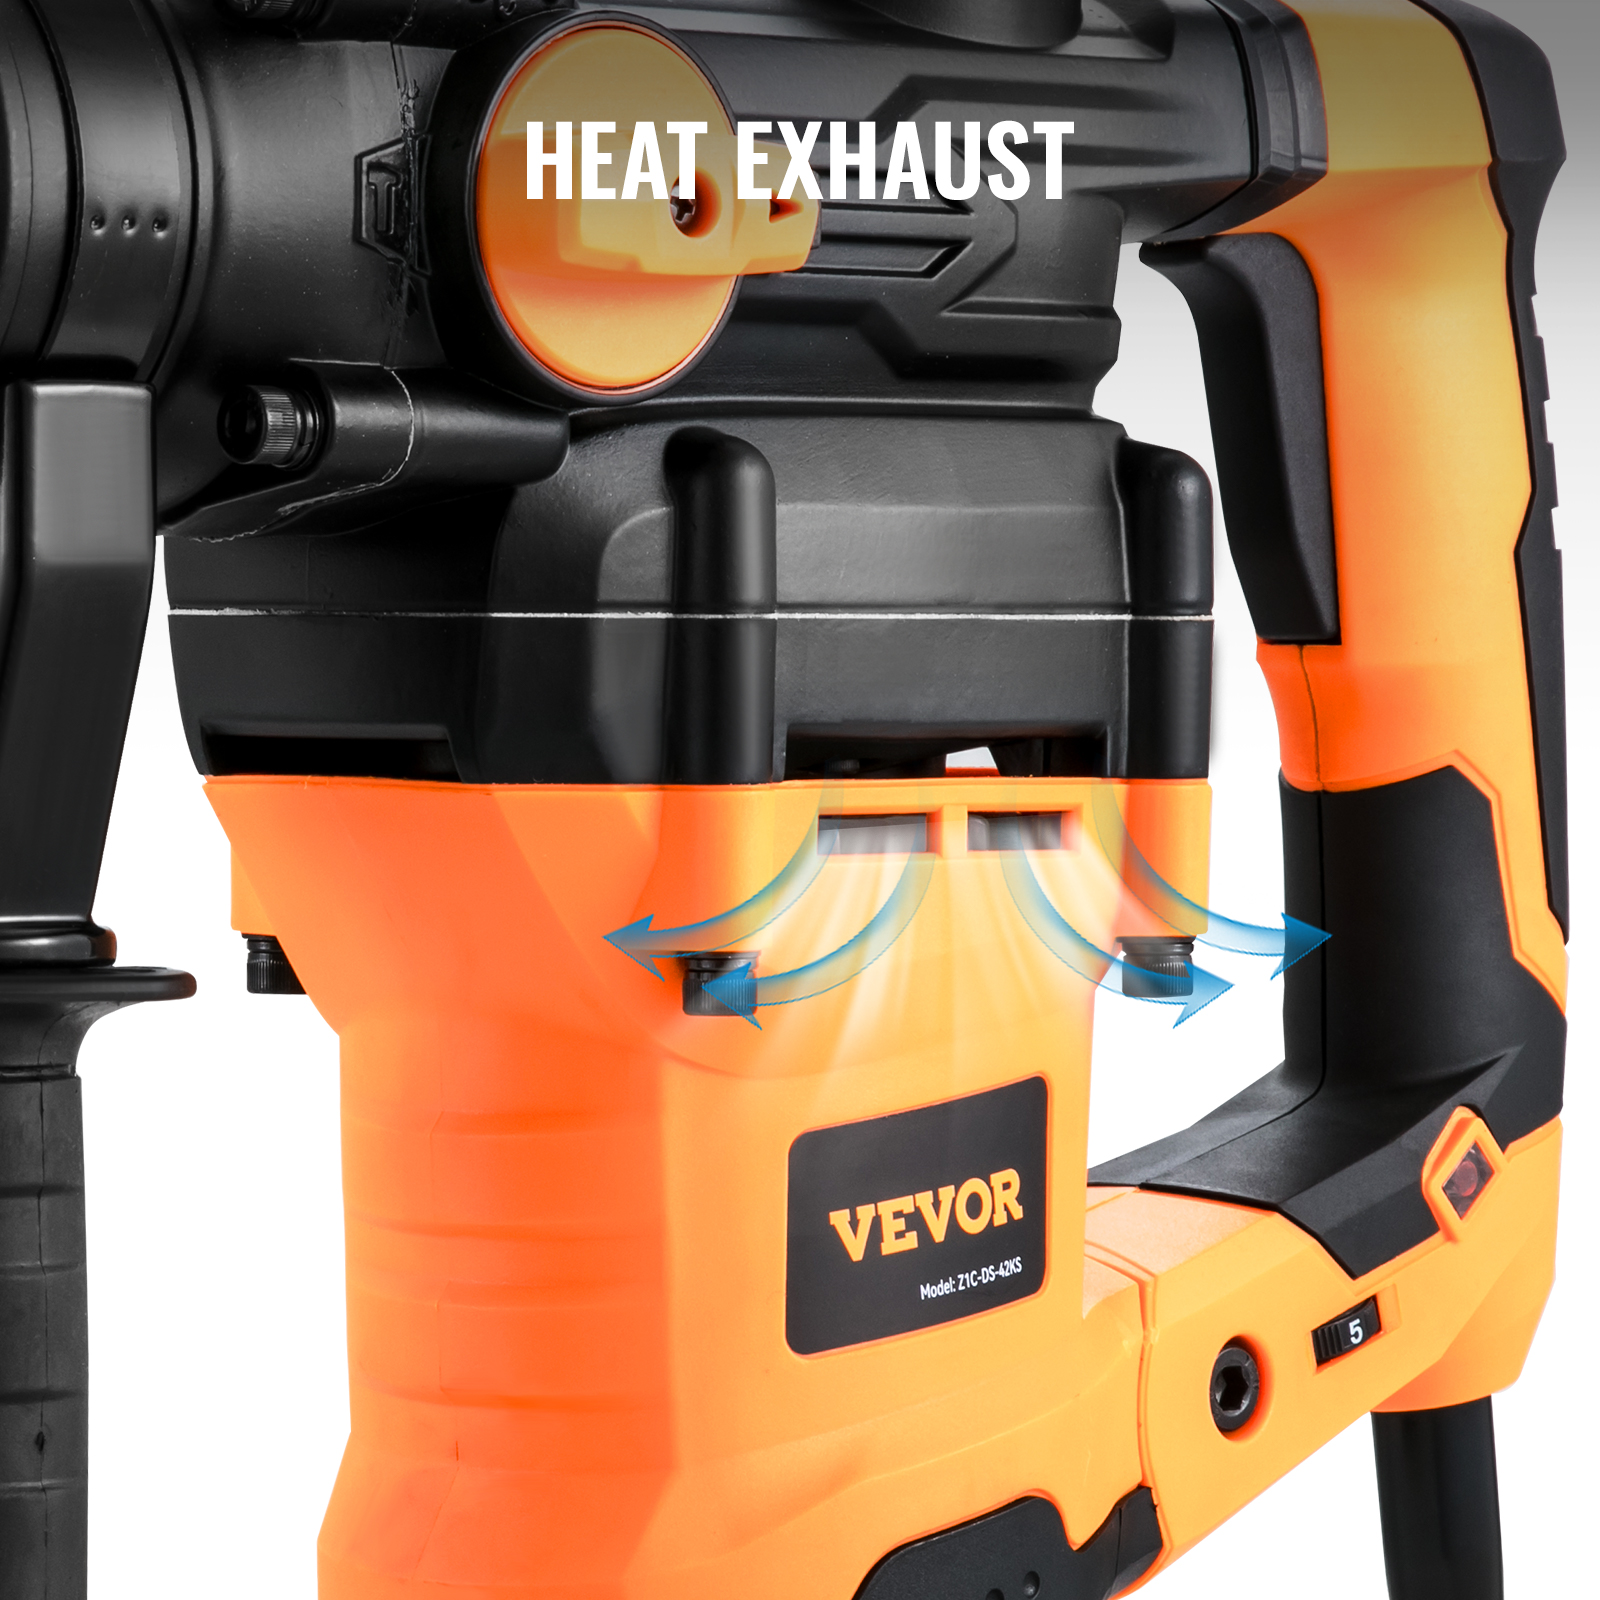 Vevor 1600W 42mm Rotary Corded Hammer Drill | Power Tool